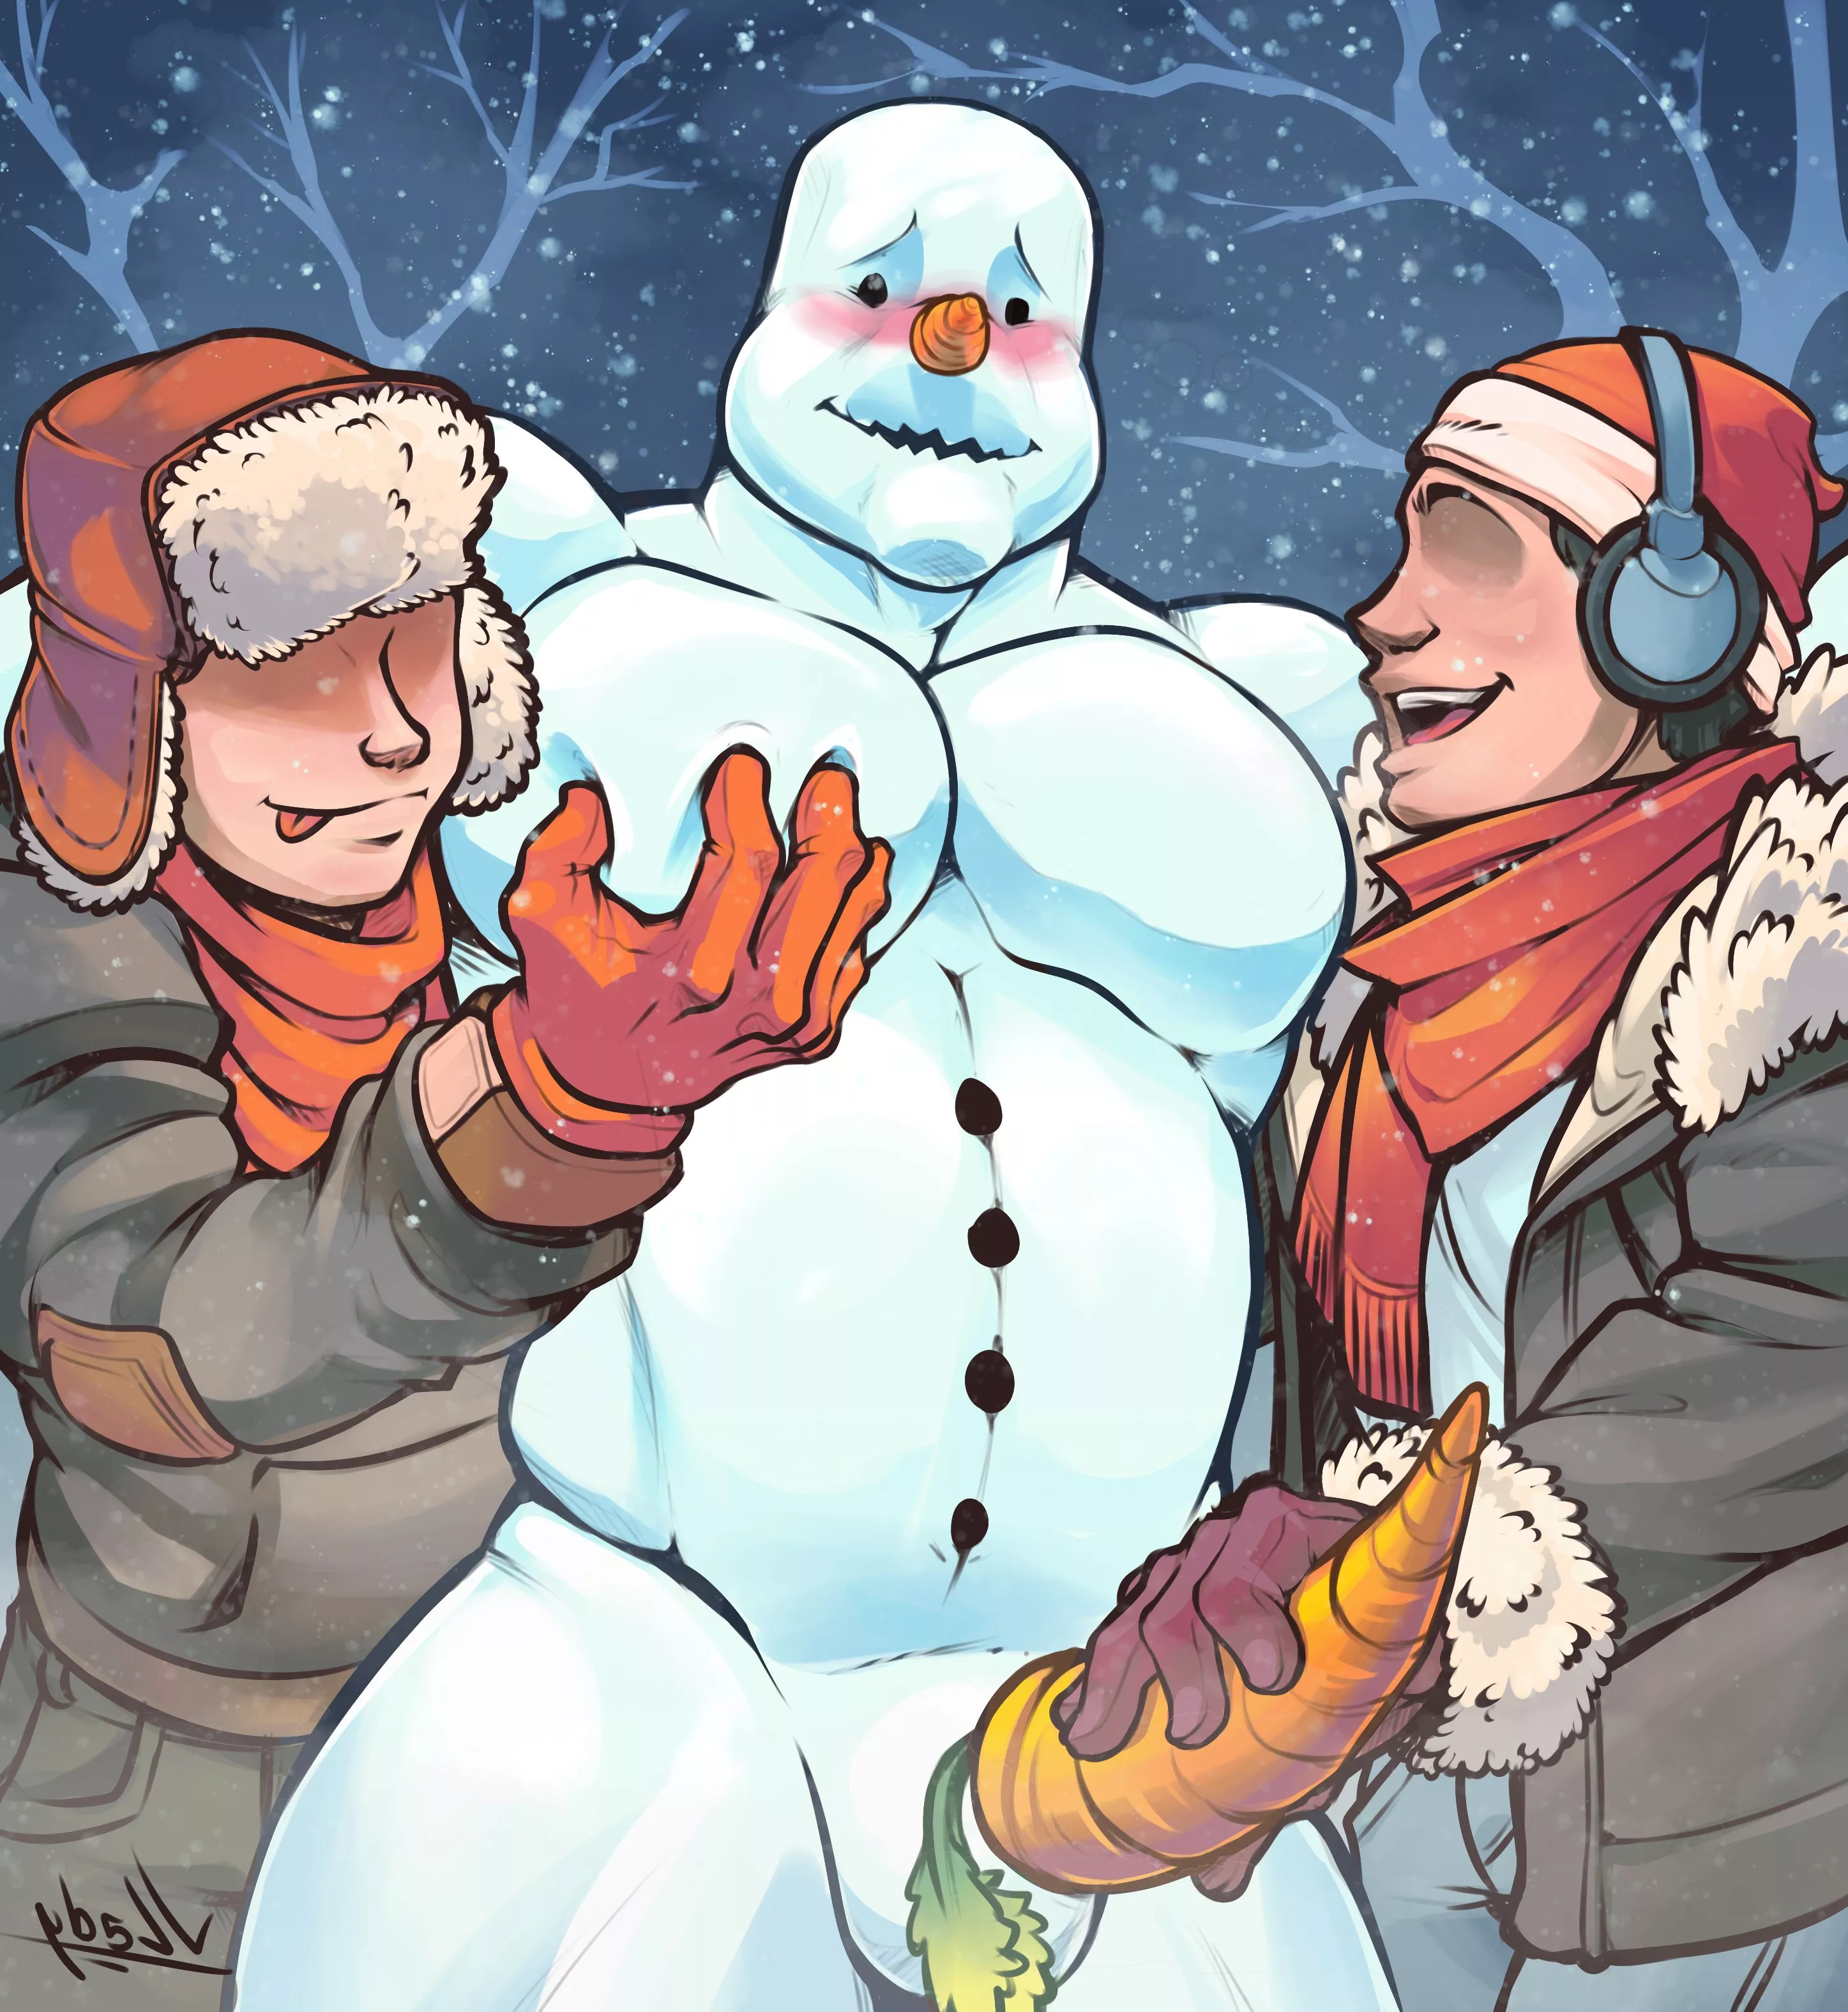 Lets make a snowman nudes in rule34gay | Onlynudes.org